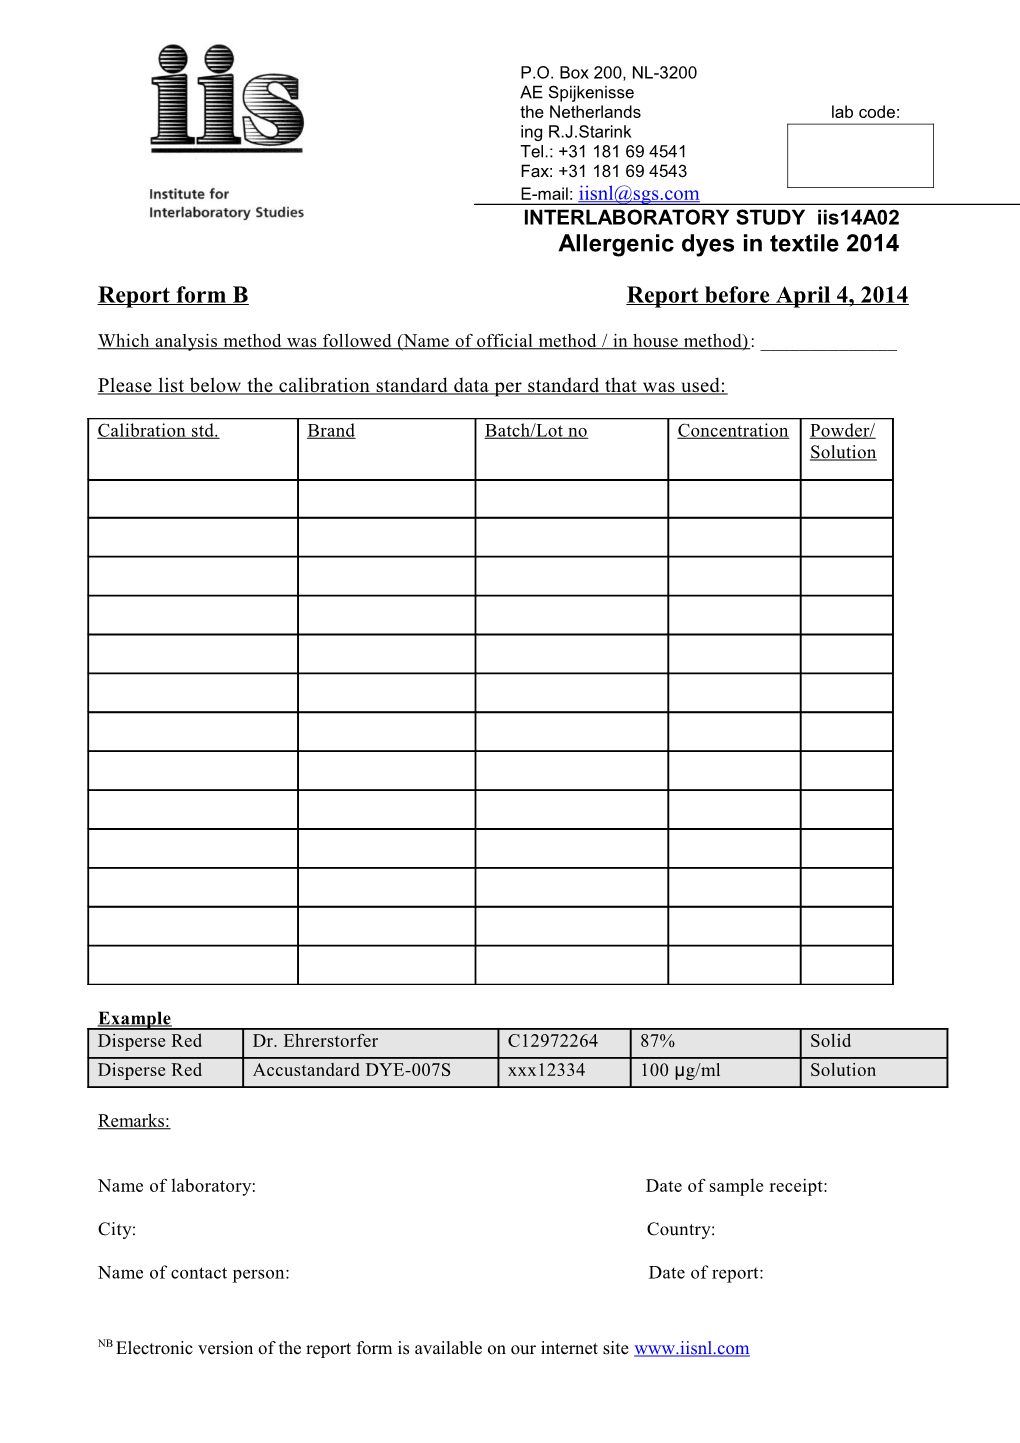 Report Form Areport Beforeapril 4, 2014